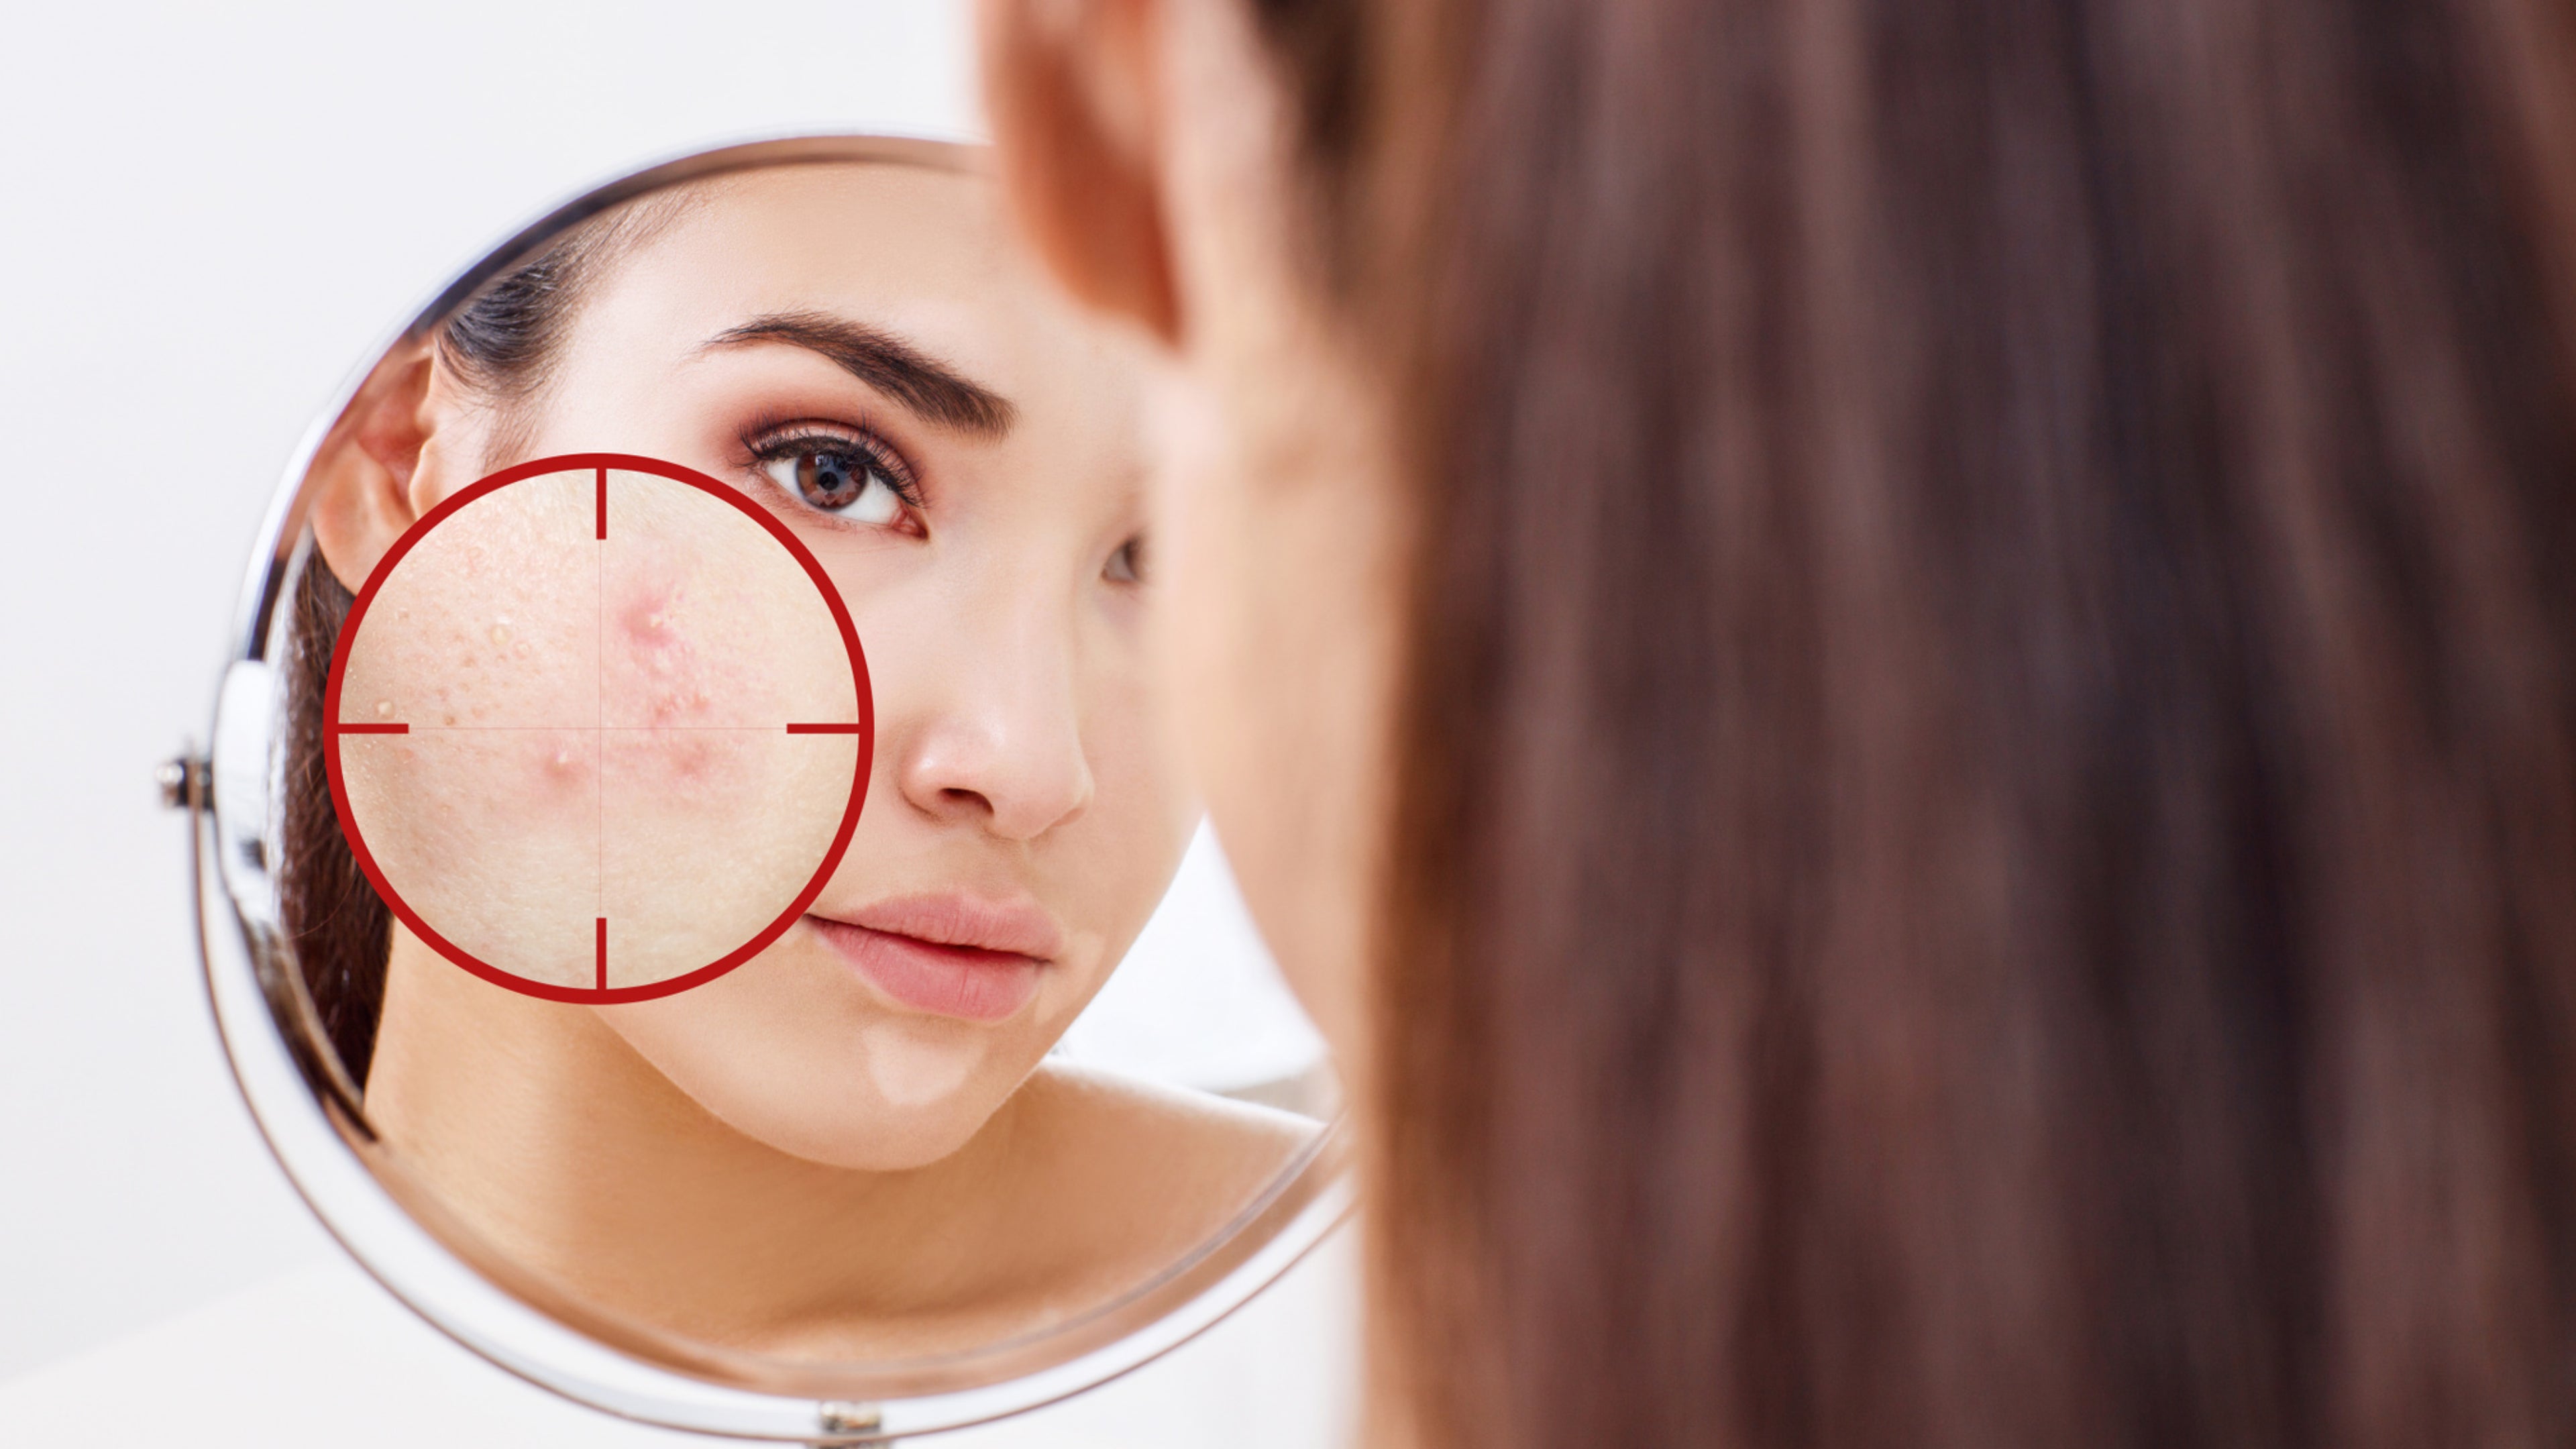 Here's a Step-by-Step Skincare Routine for Clearing and Preventing Acne